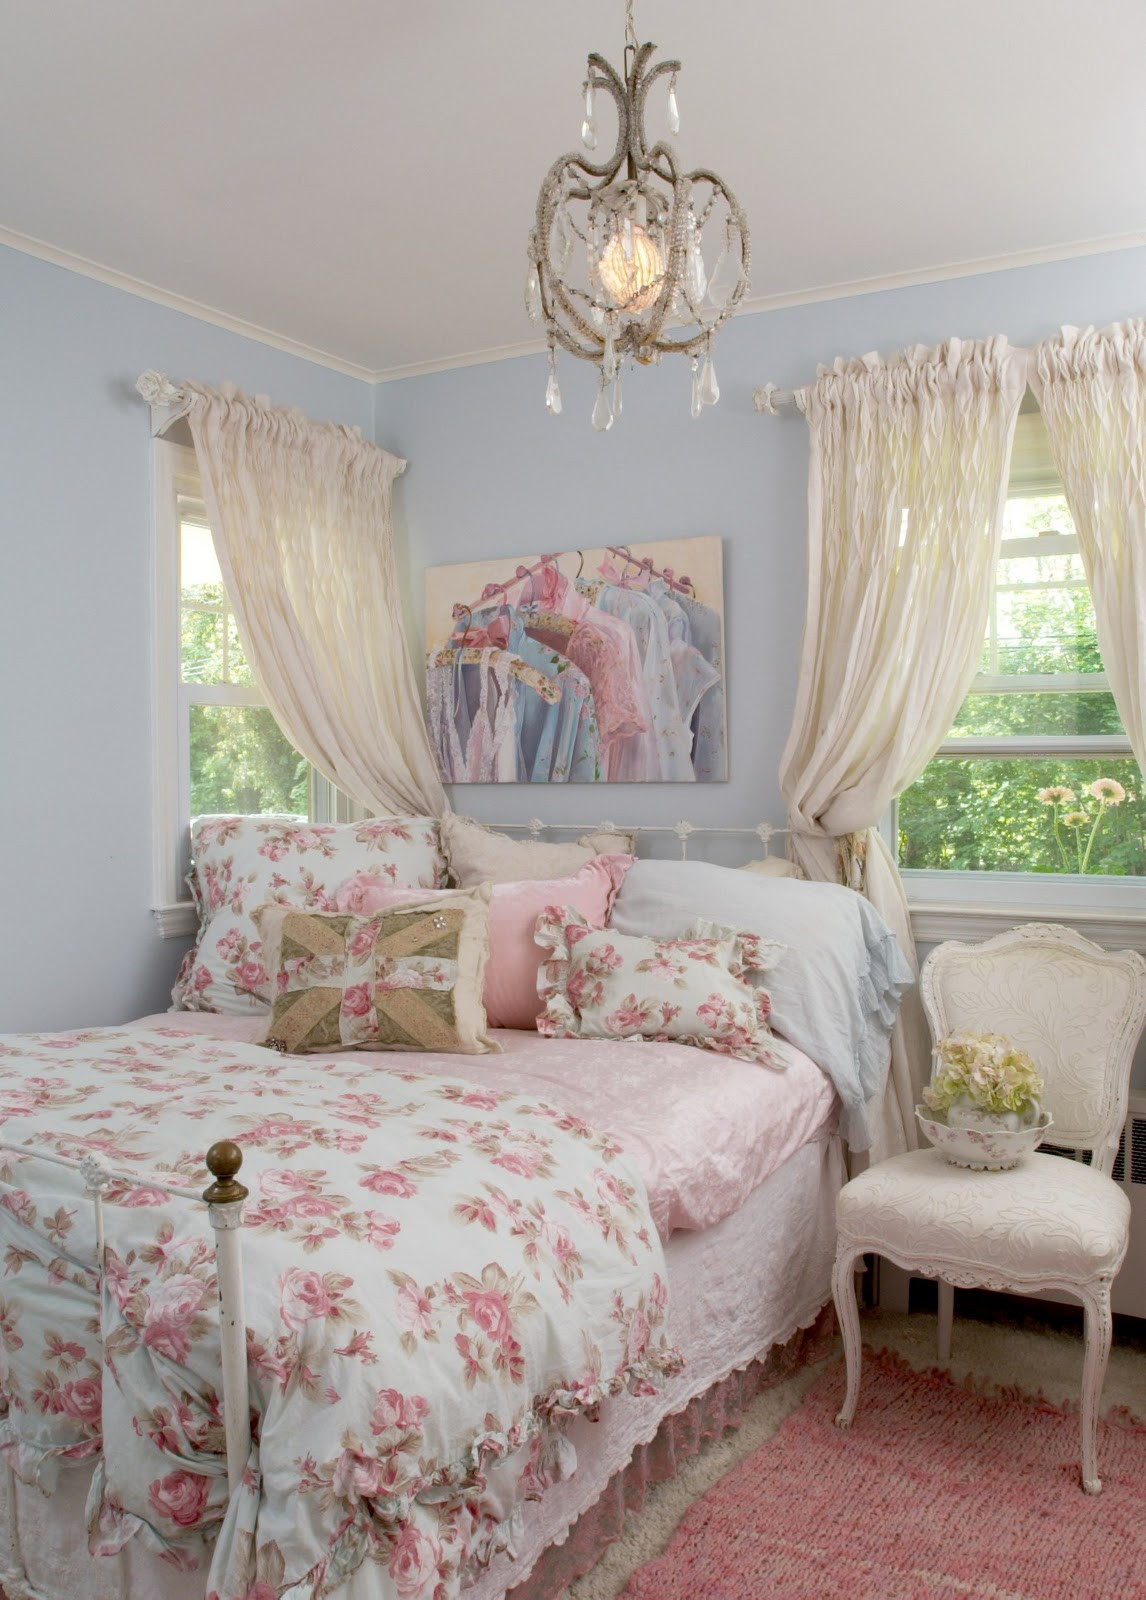 Shabby Chic Bedrooms Images
 Maison Decor My Shabby Bedroom Makeover Plan